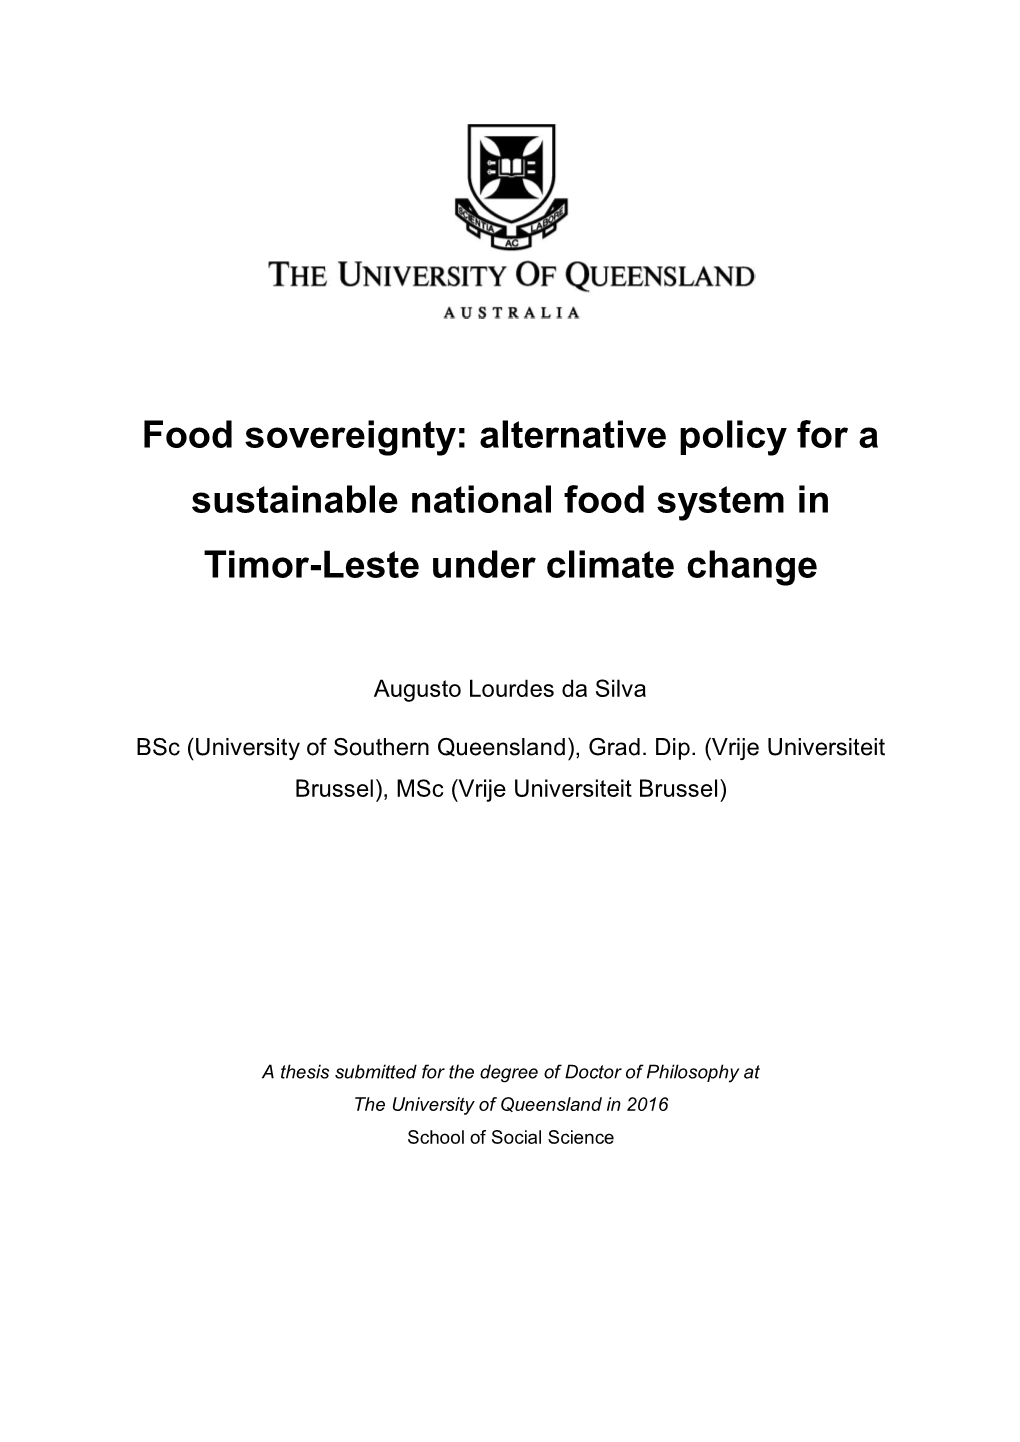 Food Sovereignty: Alternative Policy for a Sustainable National Food System in Timor-Leste Under Climate Change